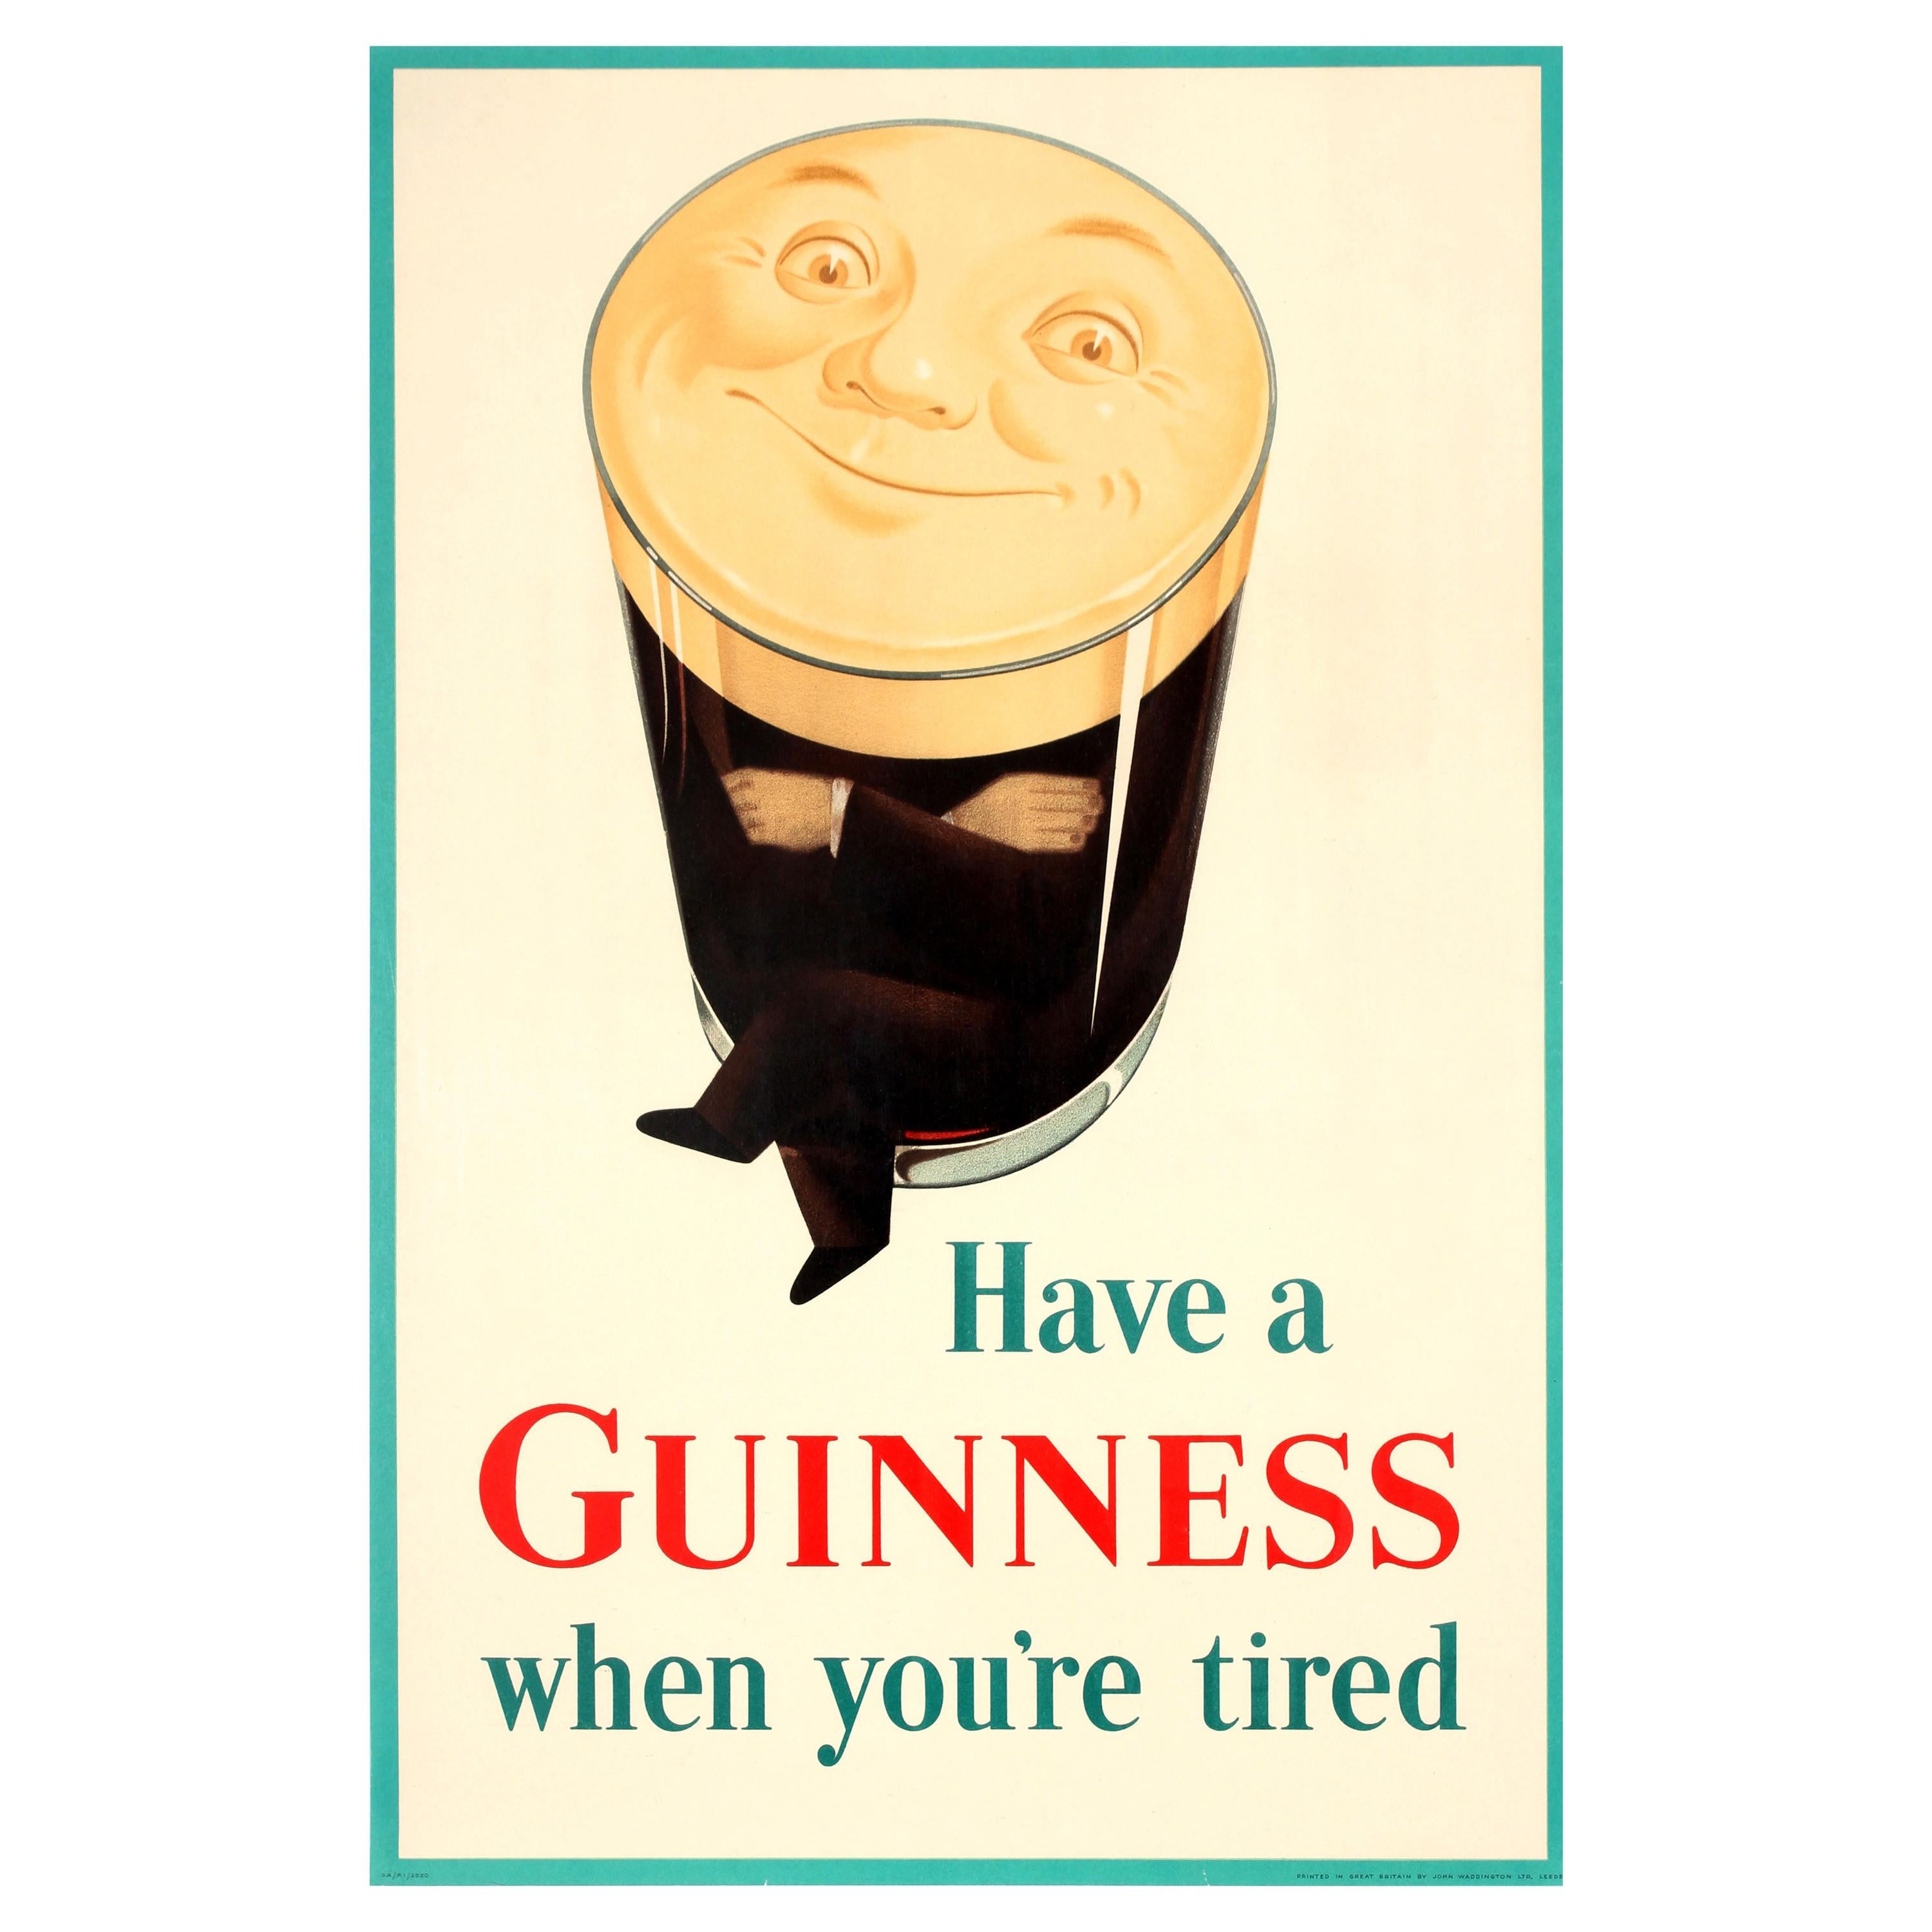 Original vintage iconic drink advertising poster for Guinness Irish stout beer - Have a Guinness when you're tired - featuring a classic image of a pint glass of Guinness as a man with his arms and legs crossed and his face smiling out from the foam